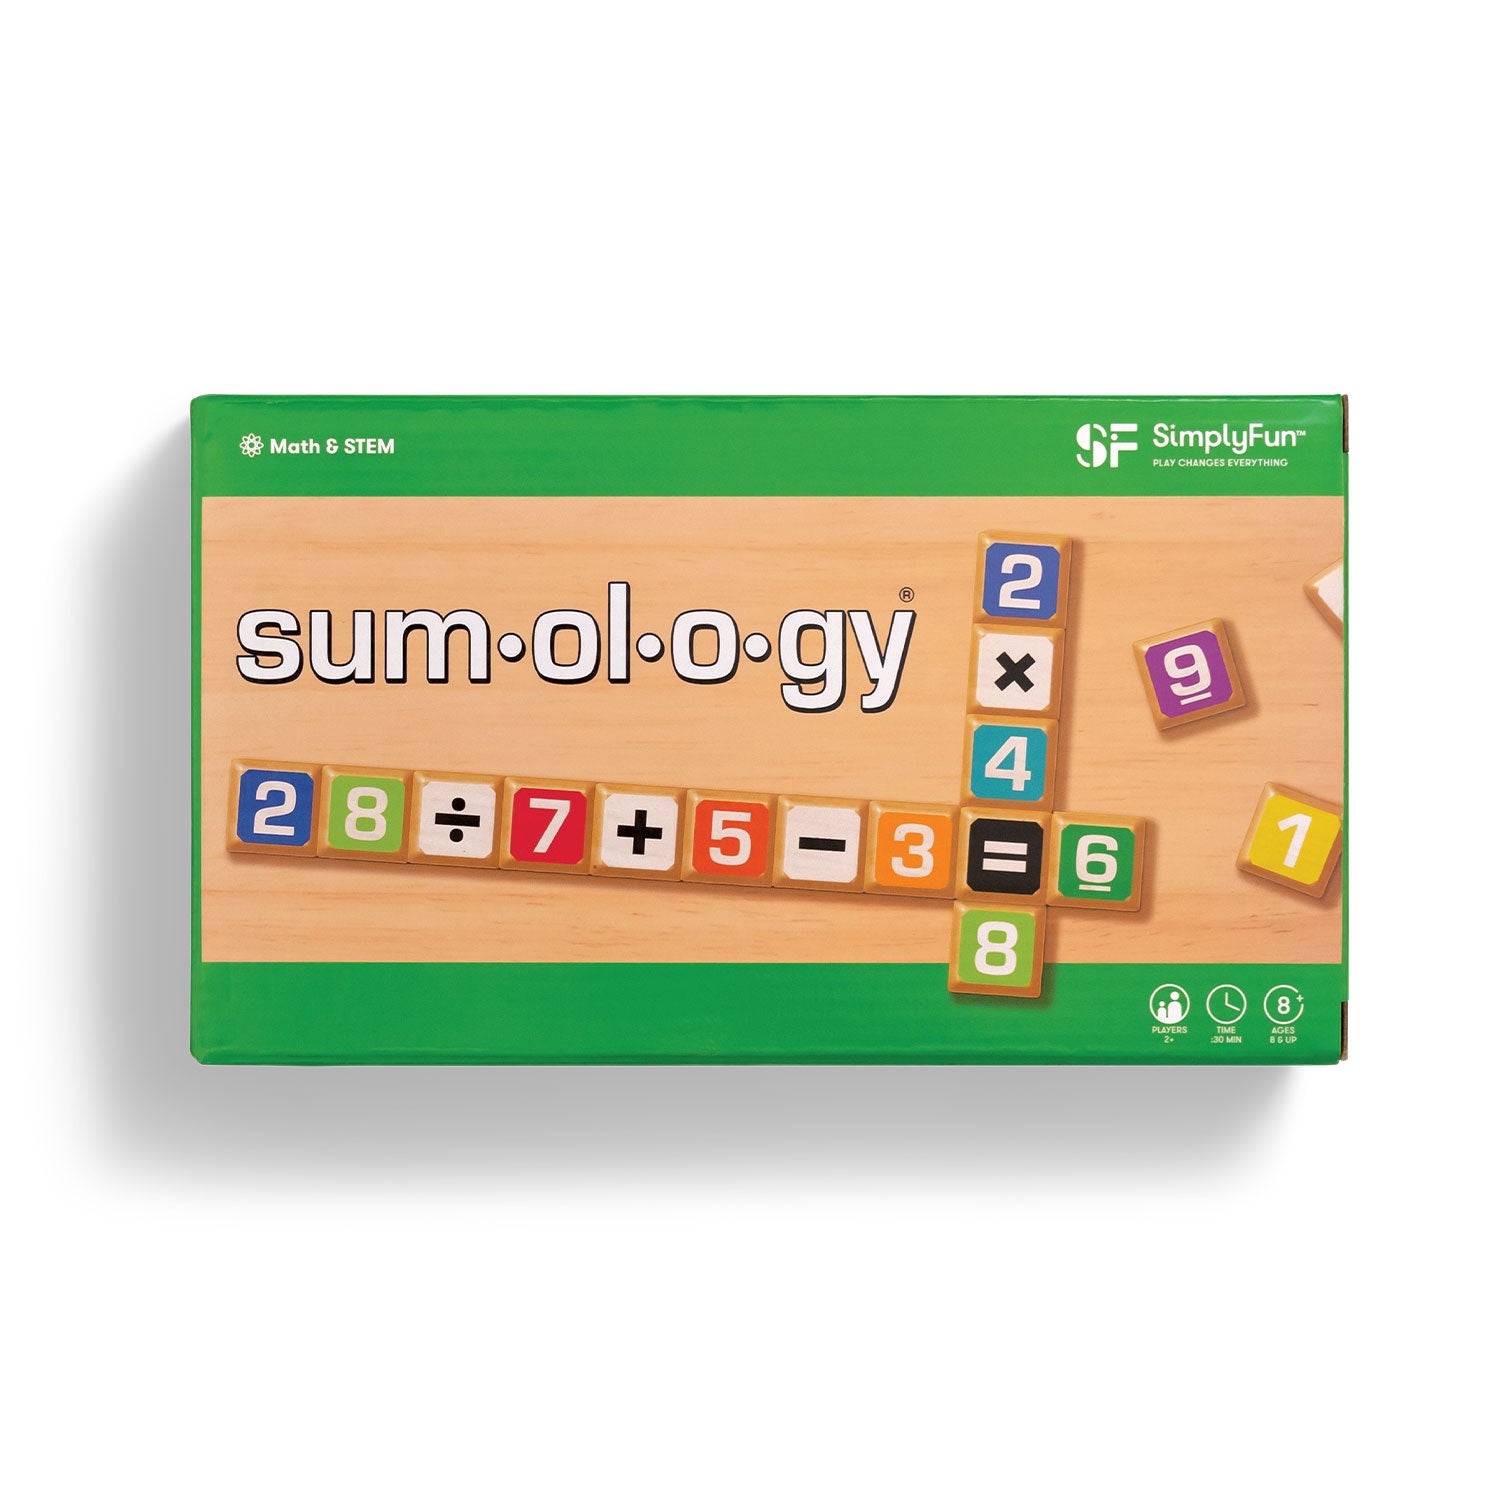 Sumology: Fun math game with wooden tiles